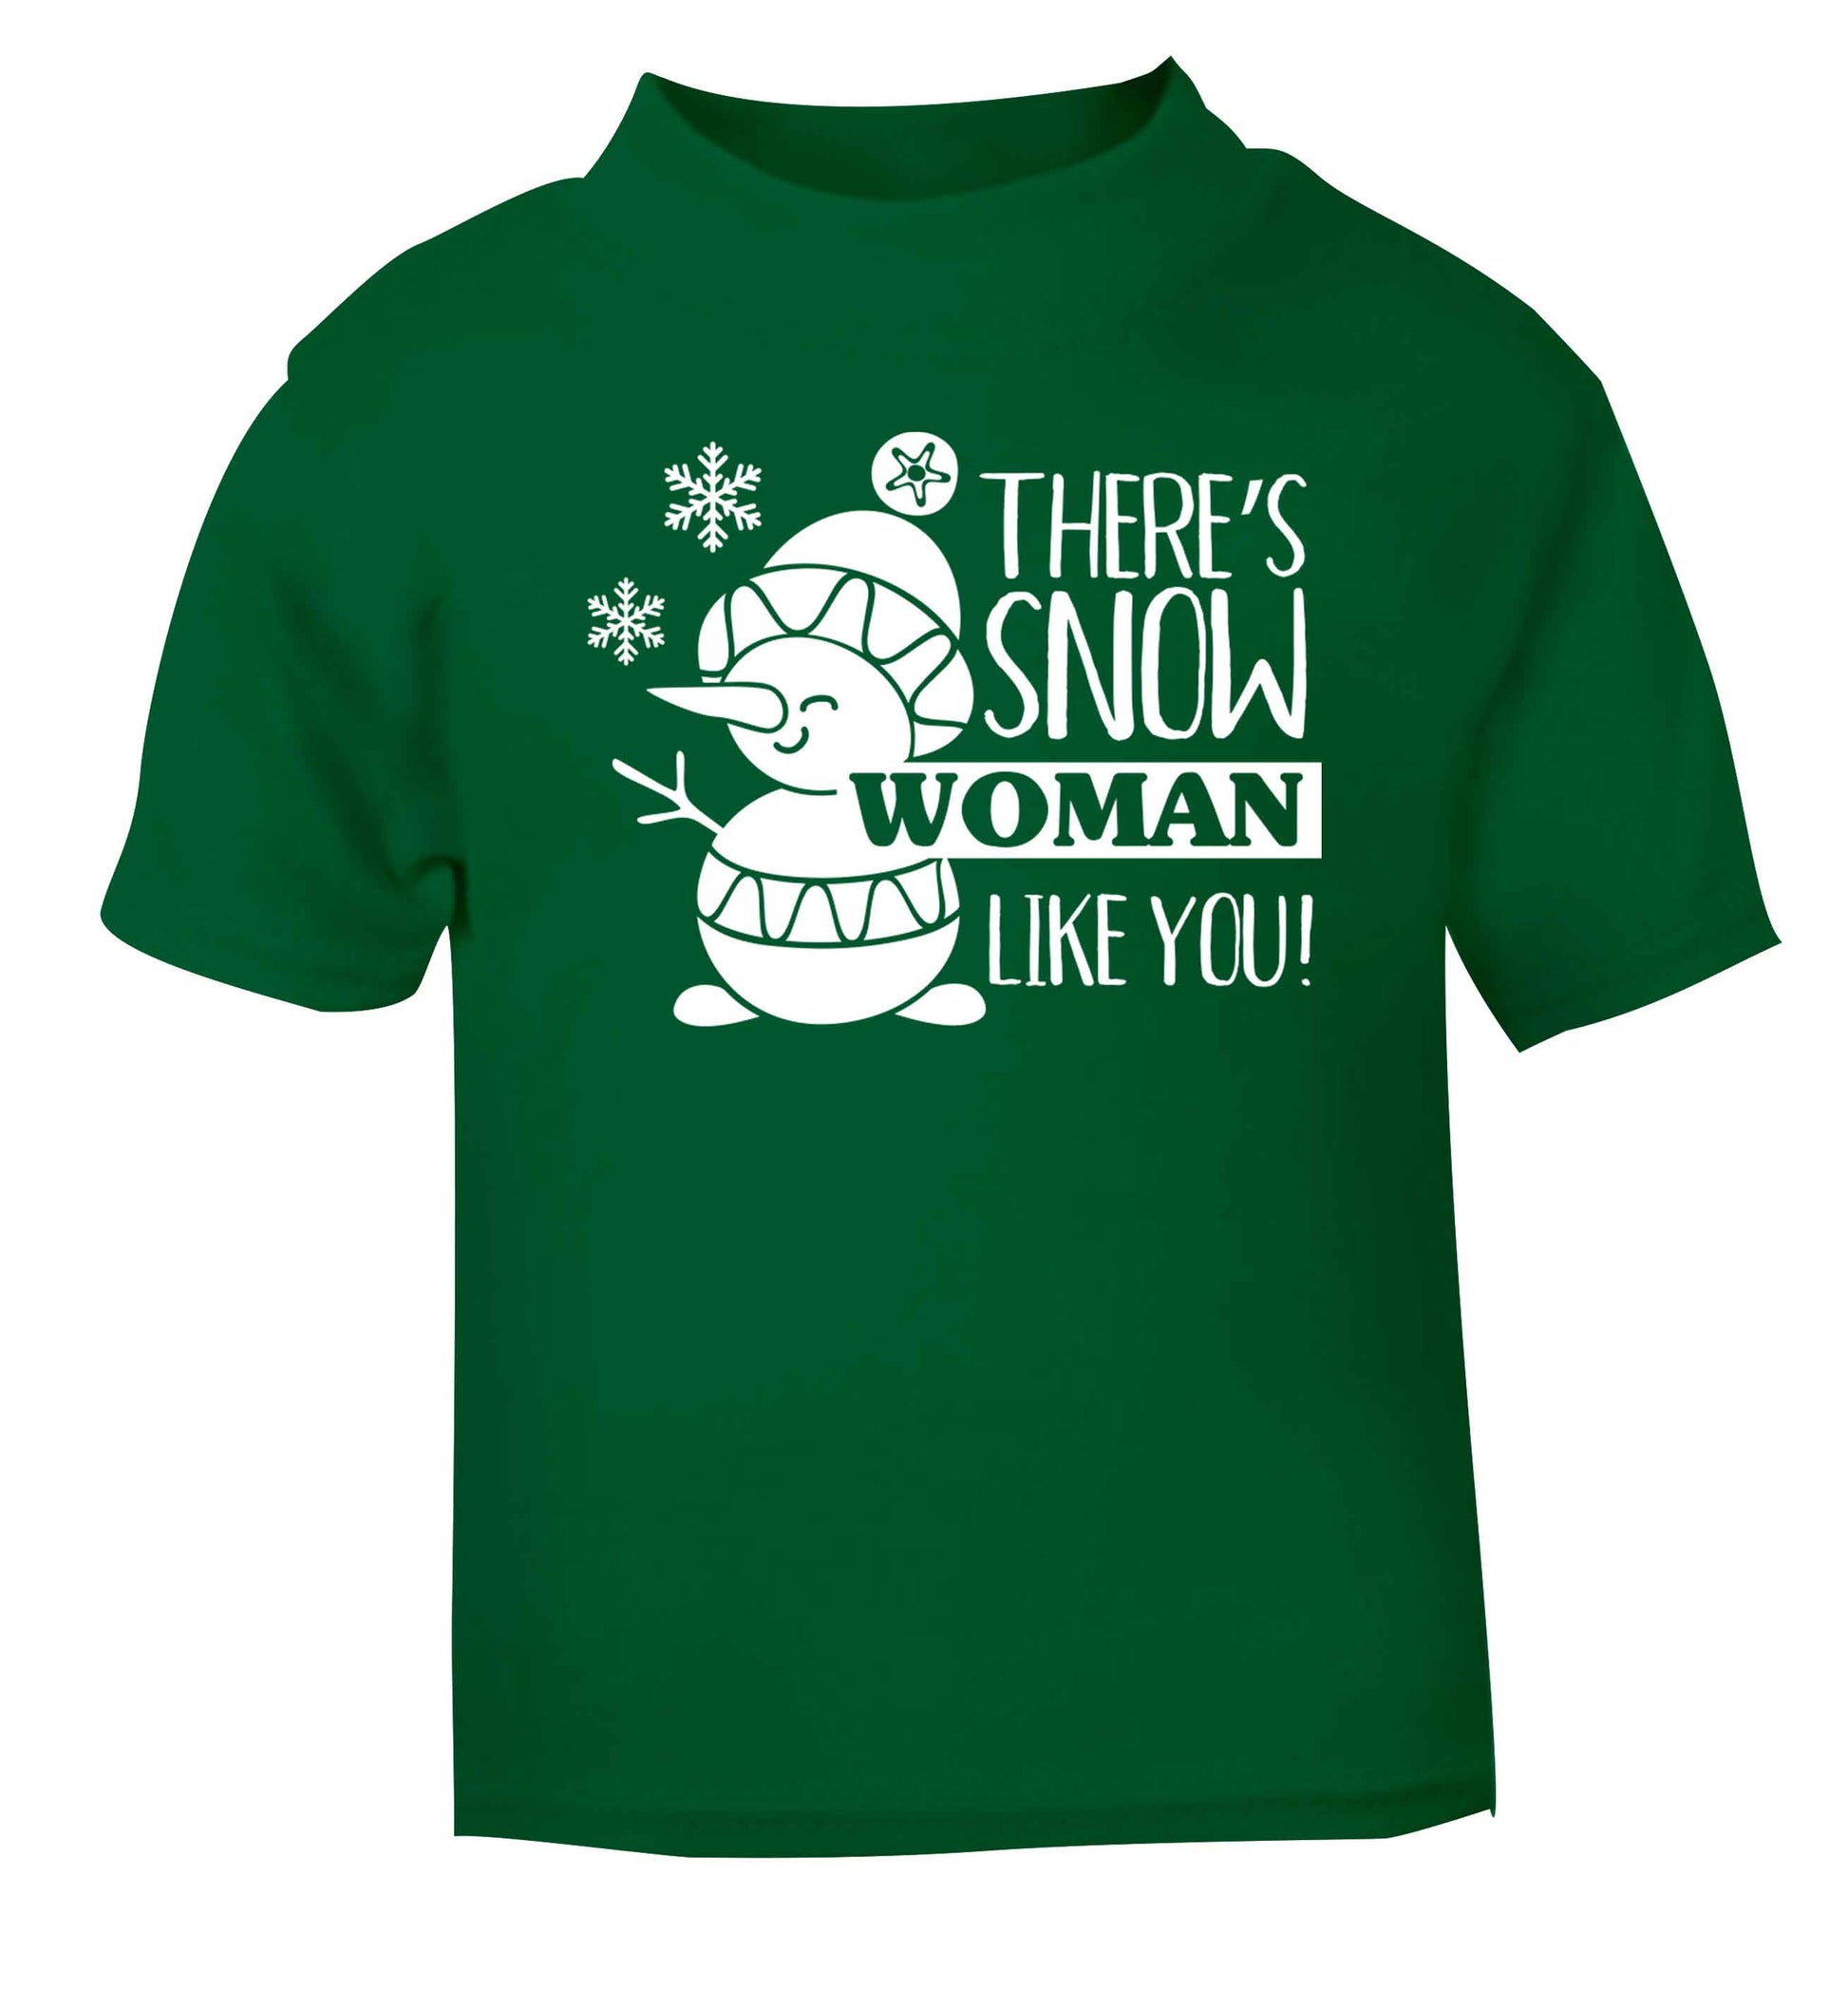 There's snow woman like you green baby toddler Tshirt 2 Years